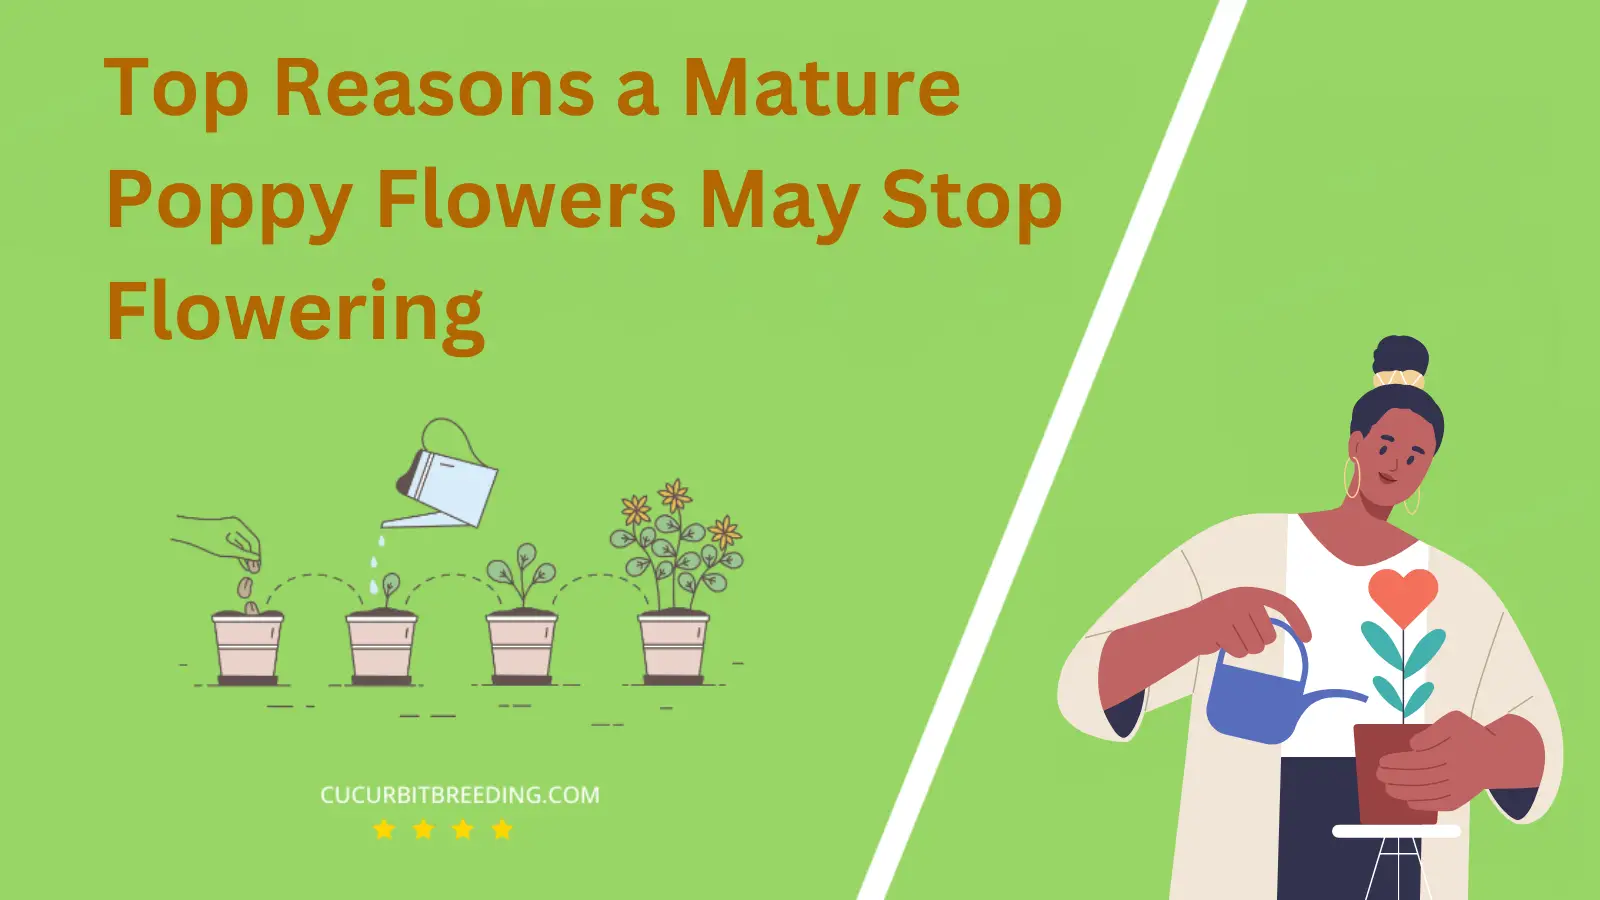 Top Reasons a Mature Poppy Flowers May Stop Flowering